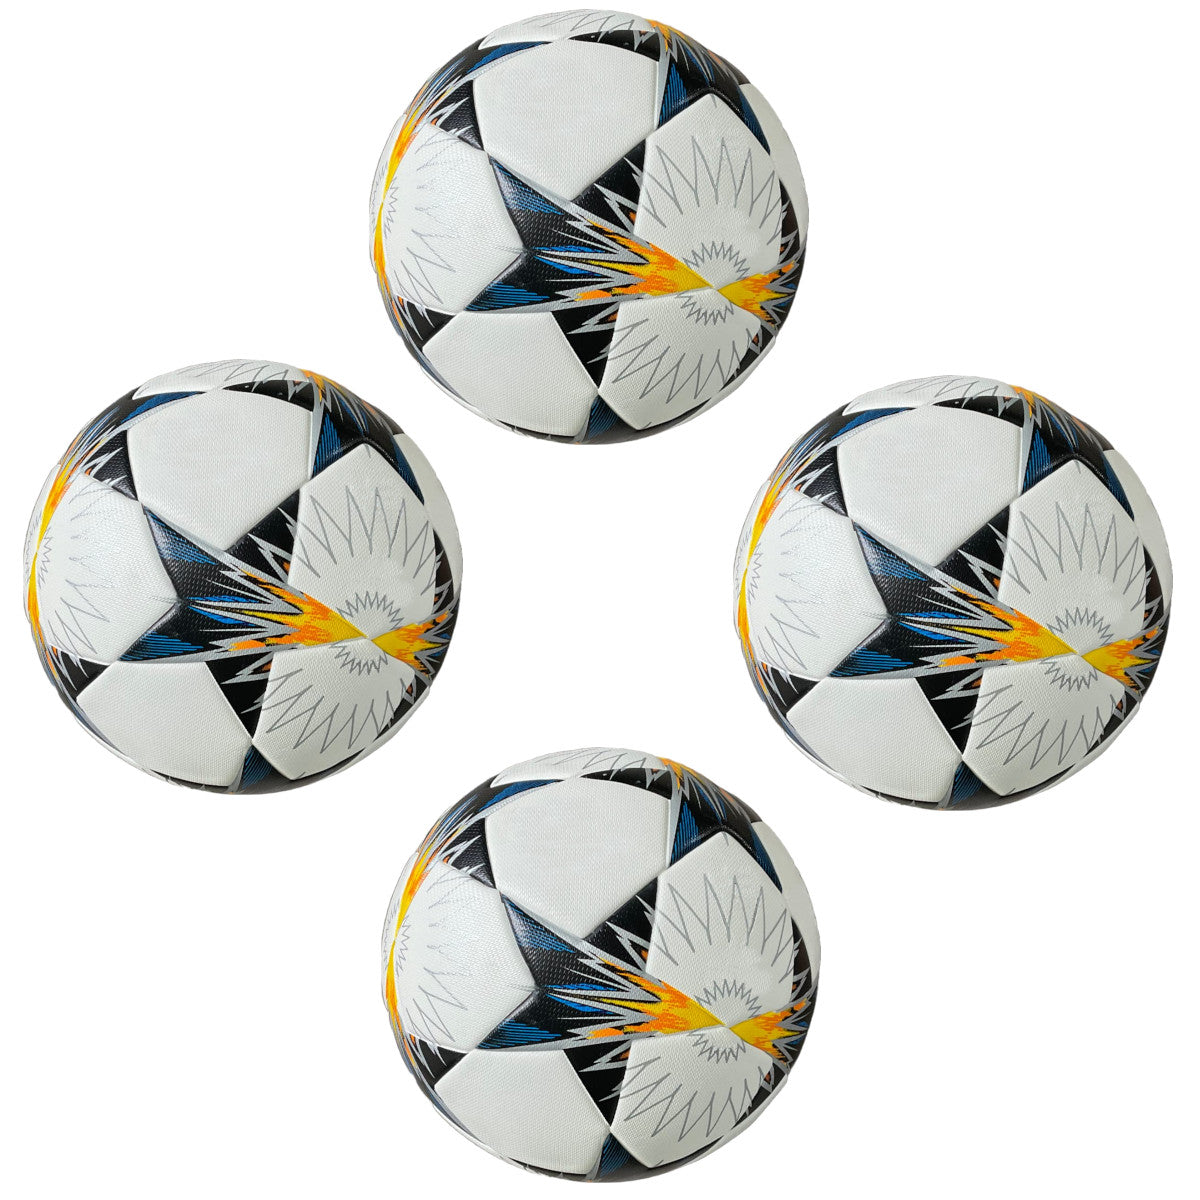 Pack of 10 Tych3L Size 5 High Quality Soccer Ball Champions League Kiev Final